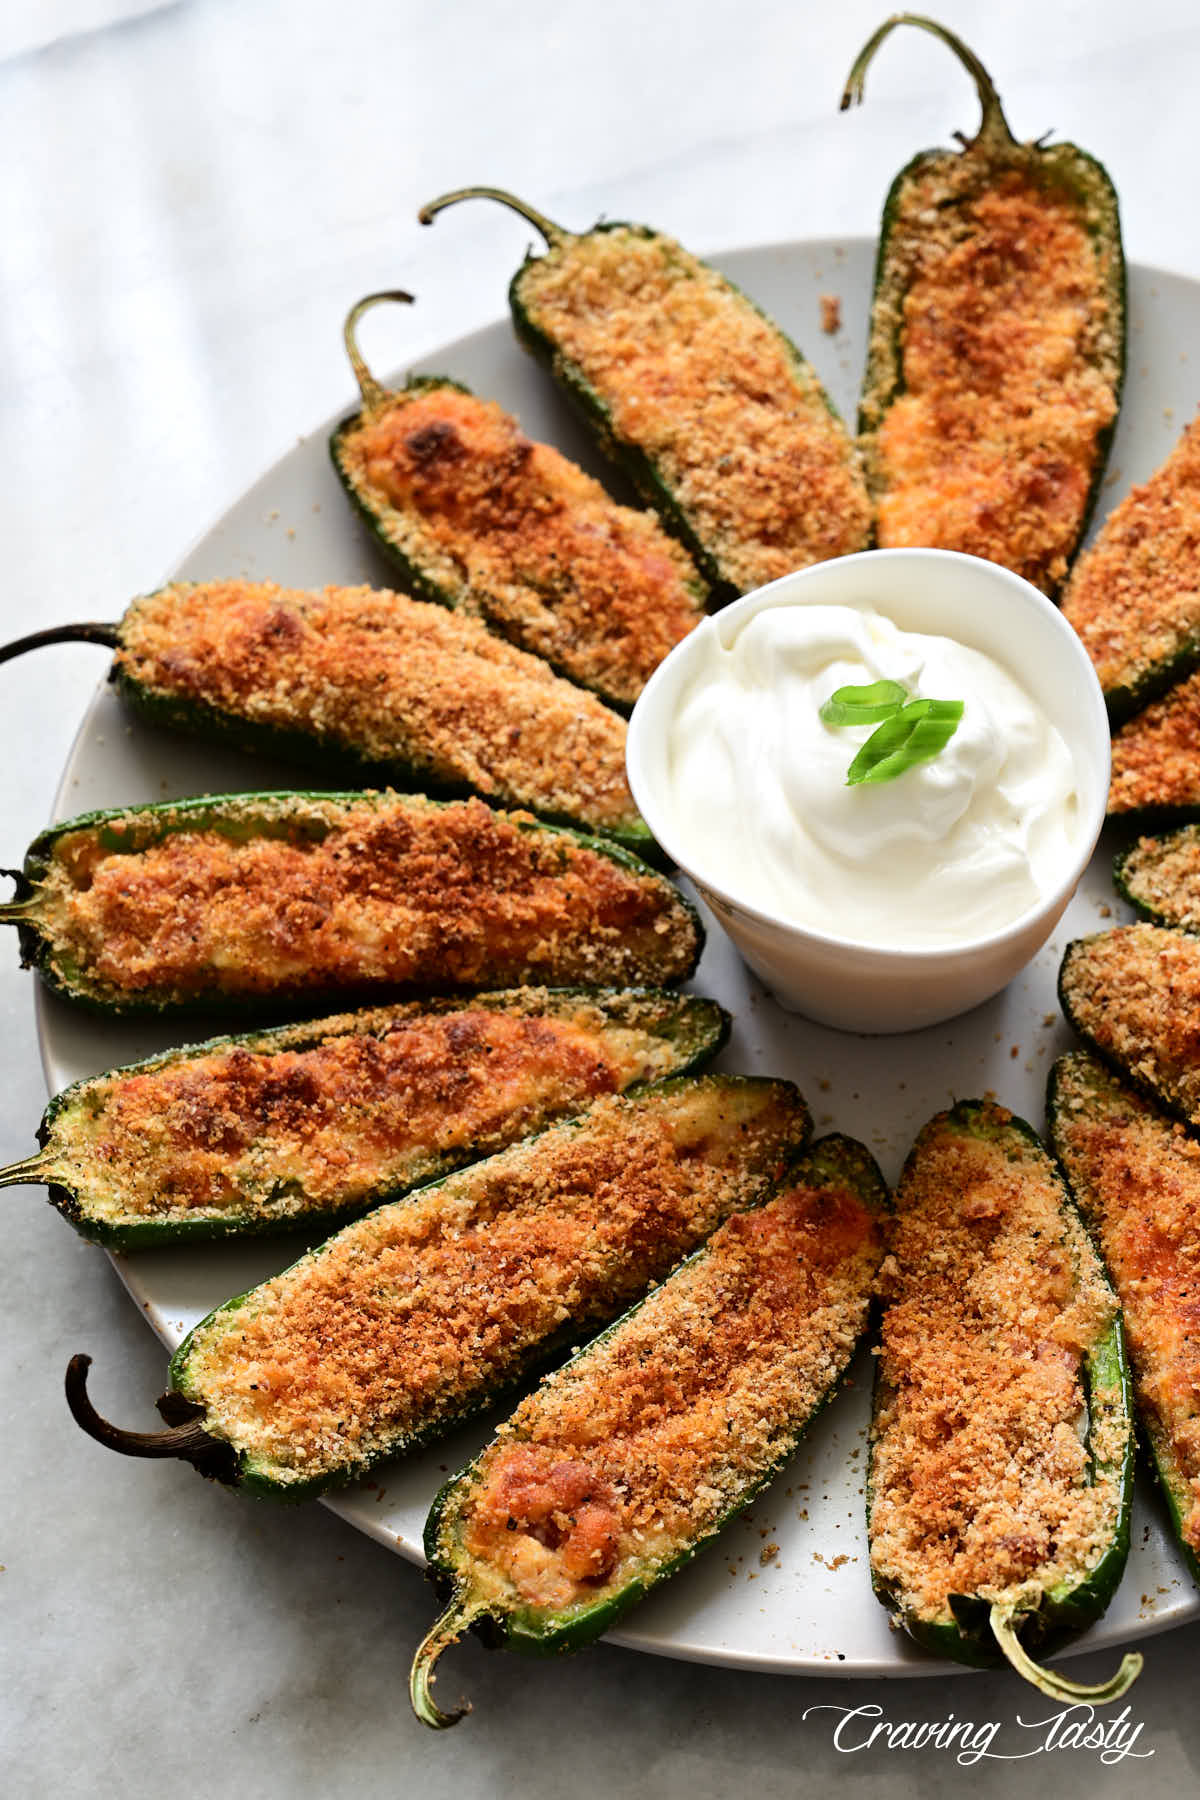 Partial view of a platter with crispy, well-browned jalapeno poppers and a white dipping sauce.